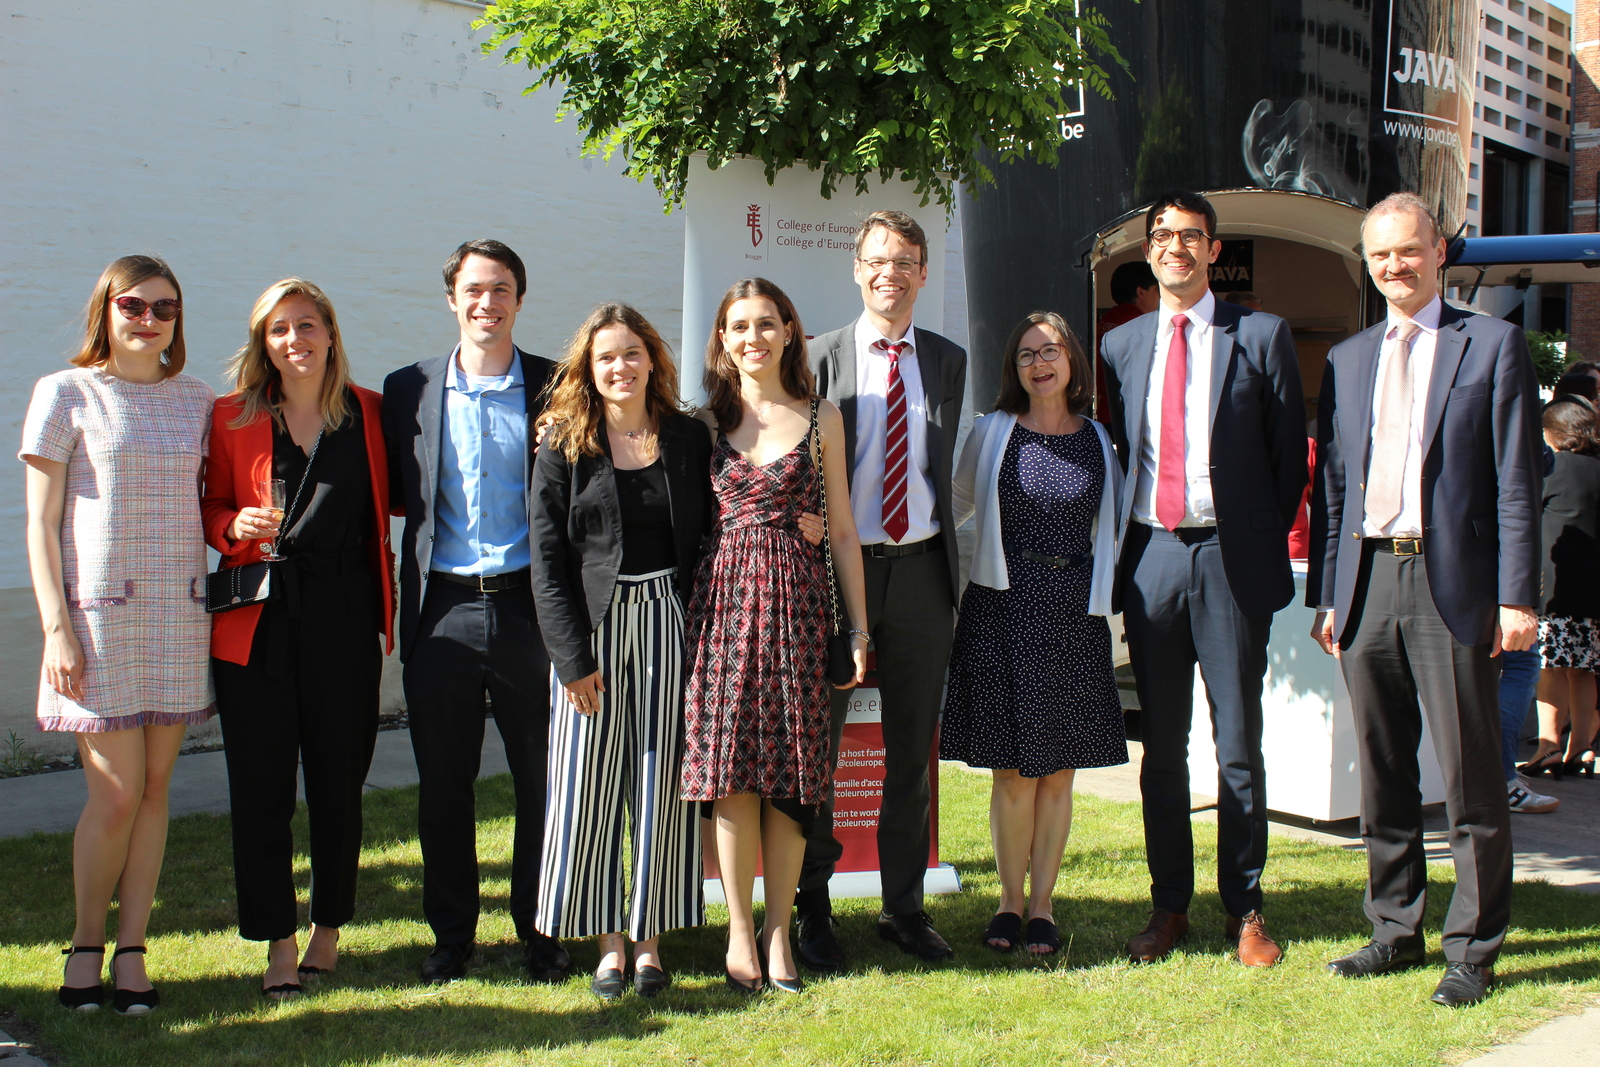 MATA students graduate at the College of Europe